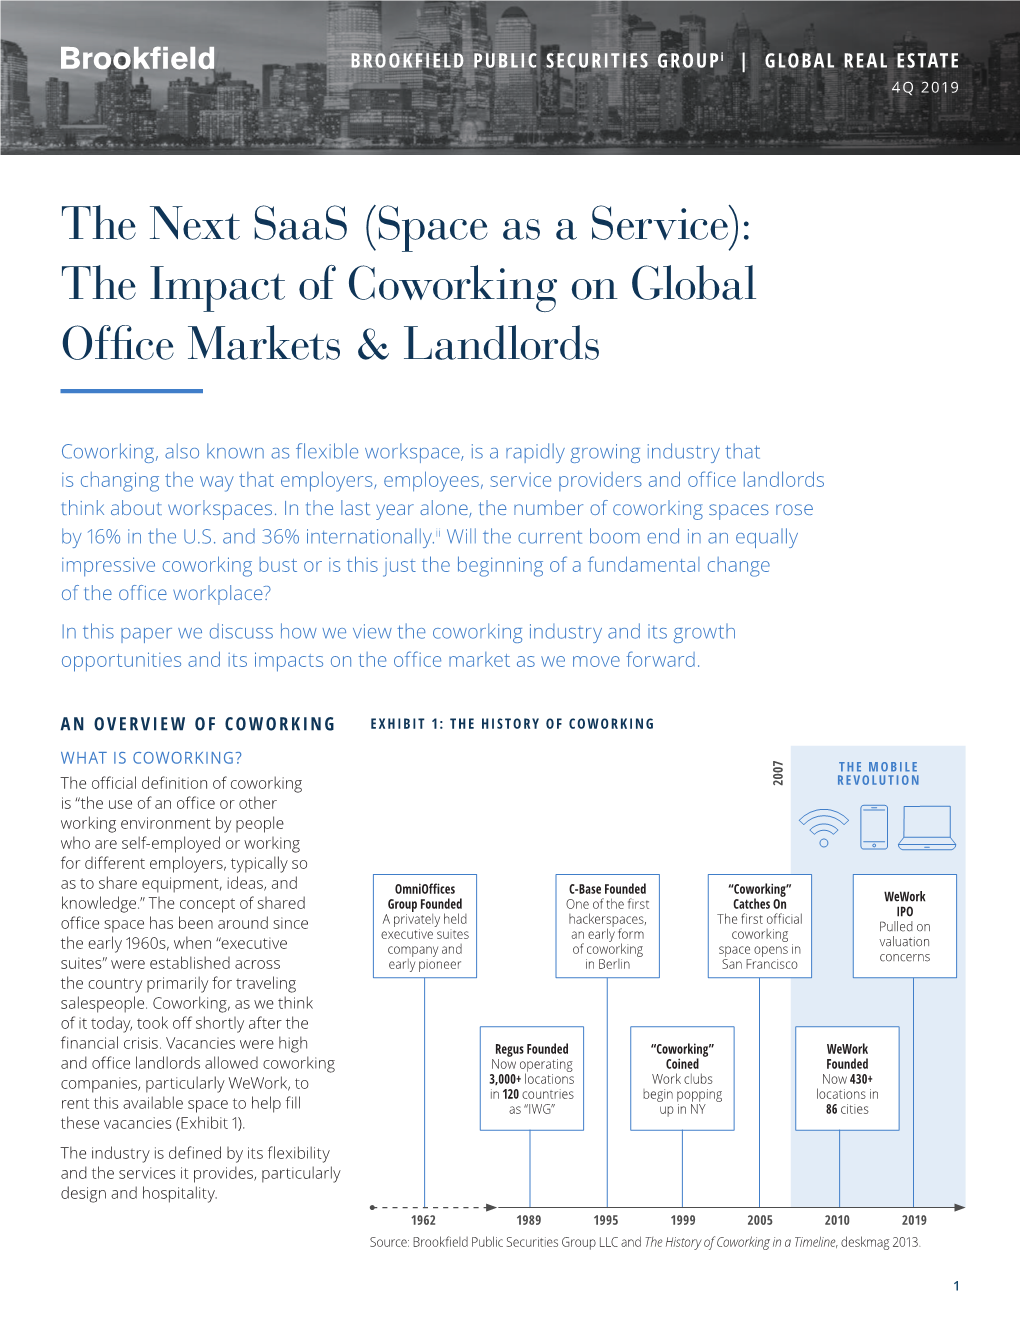 The Next Saas (Space As a Service): the Impact of Coworking on Global Office Markets & Landlords